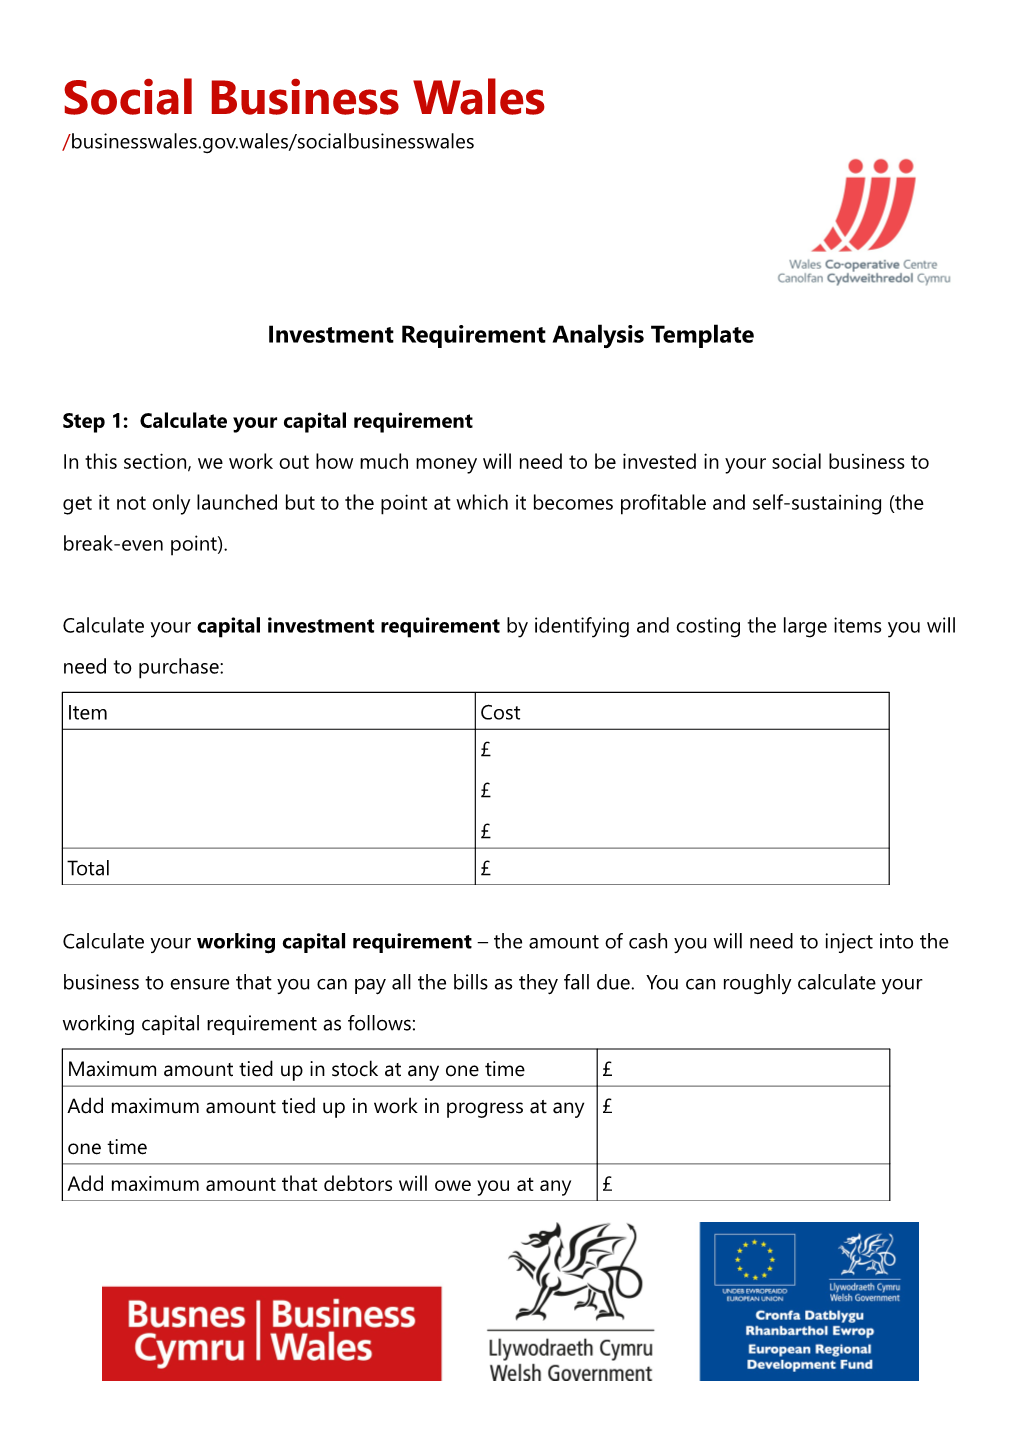 Investment Requirement Analysis Template